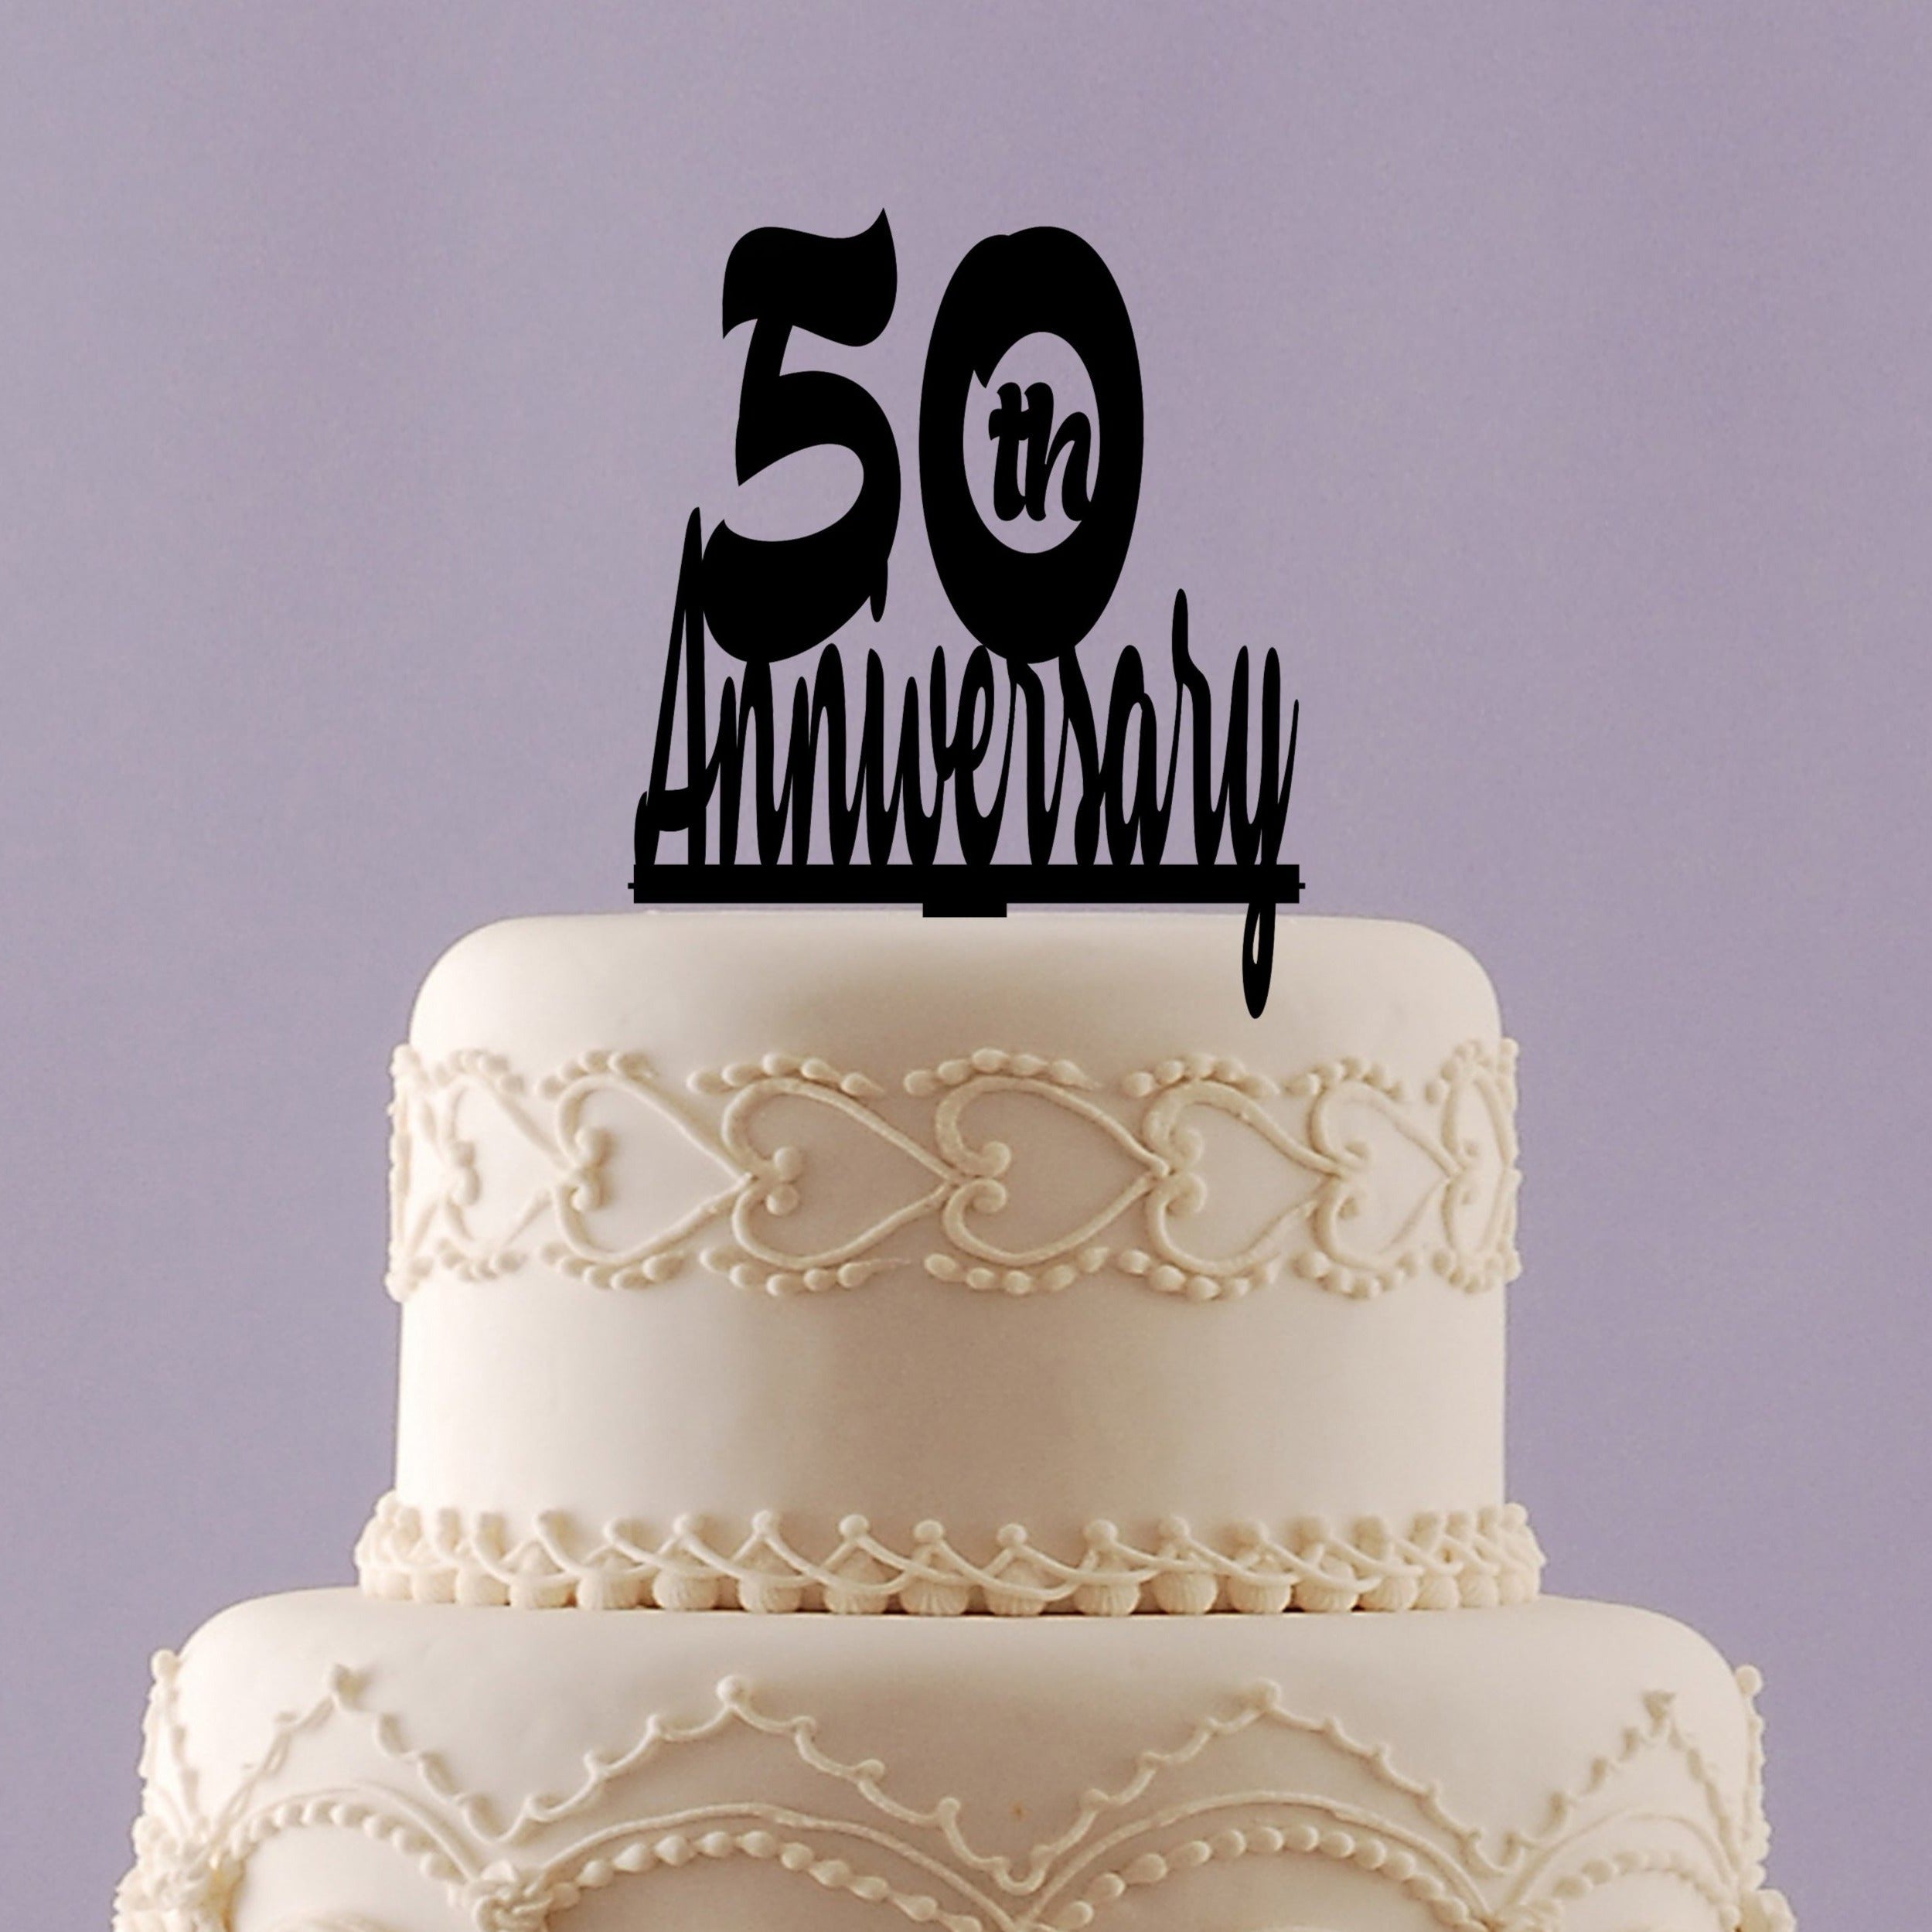 50th Birthday Cake Topper | 50th Anniversary Cake Topper - Celebrate Cake  Toppers